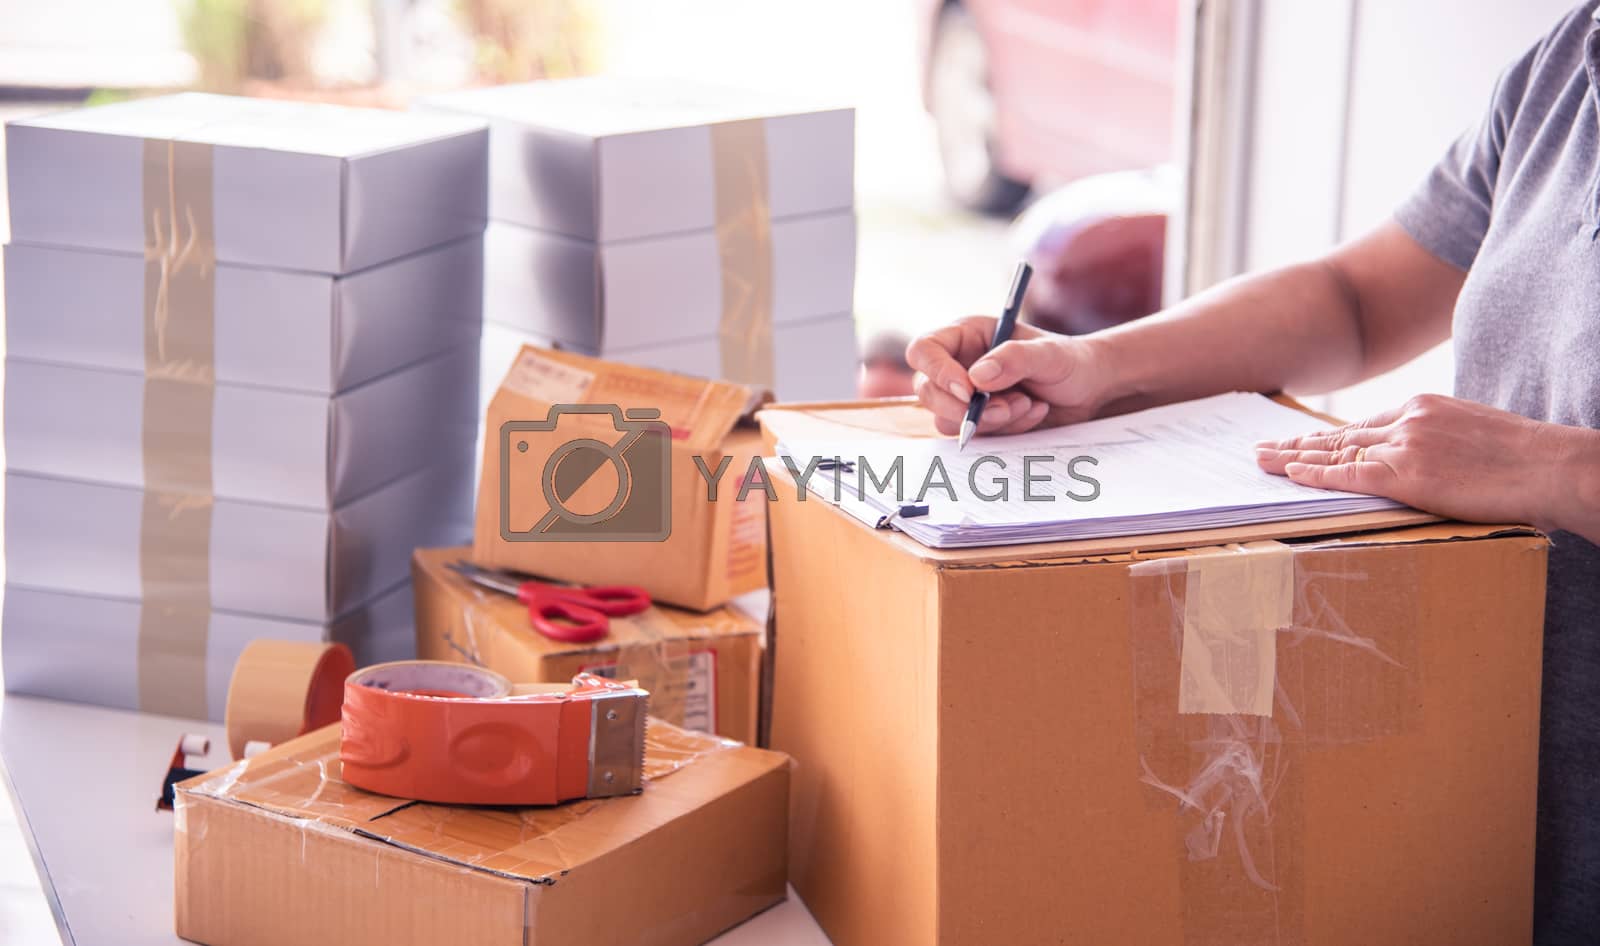 Royalty free image of The officer is checking the goods in the warehouse. by photobyphotoboy